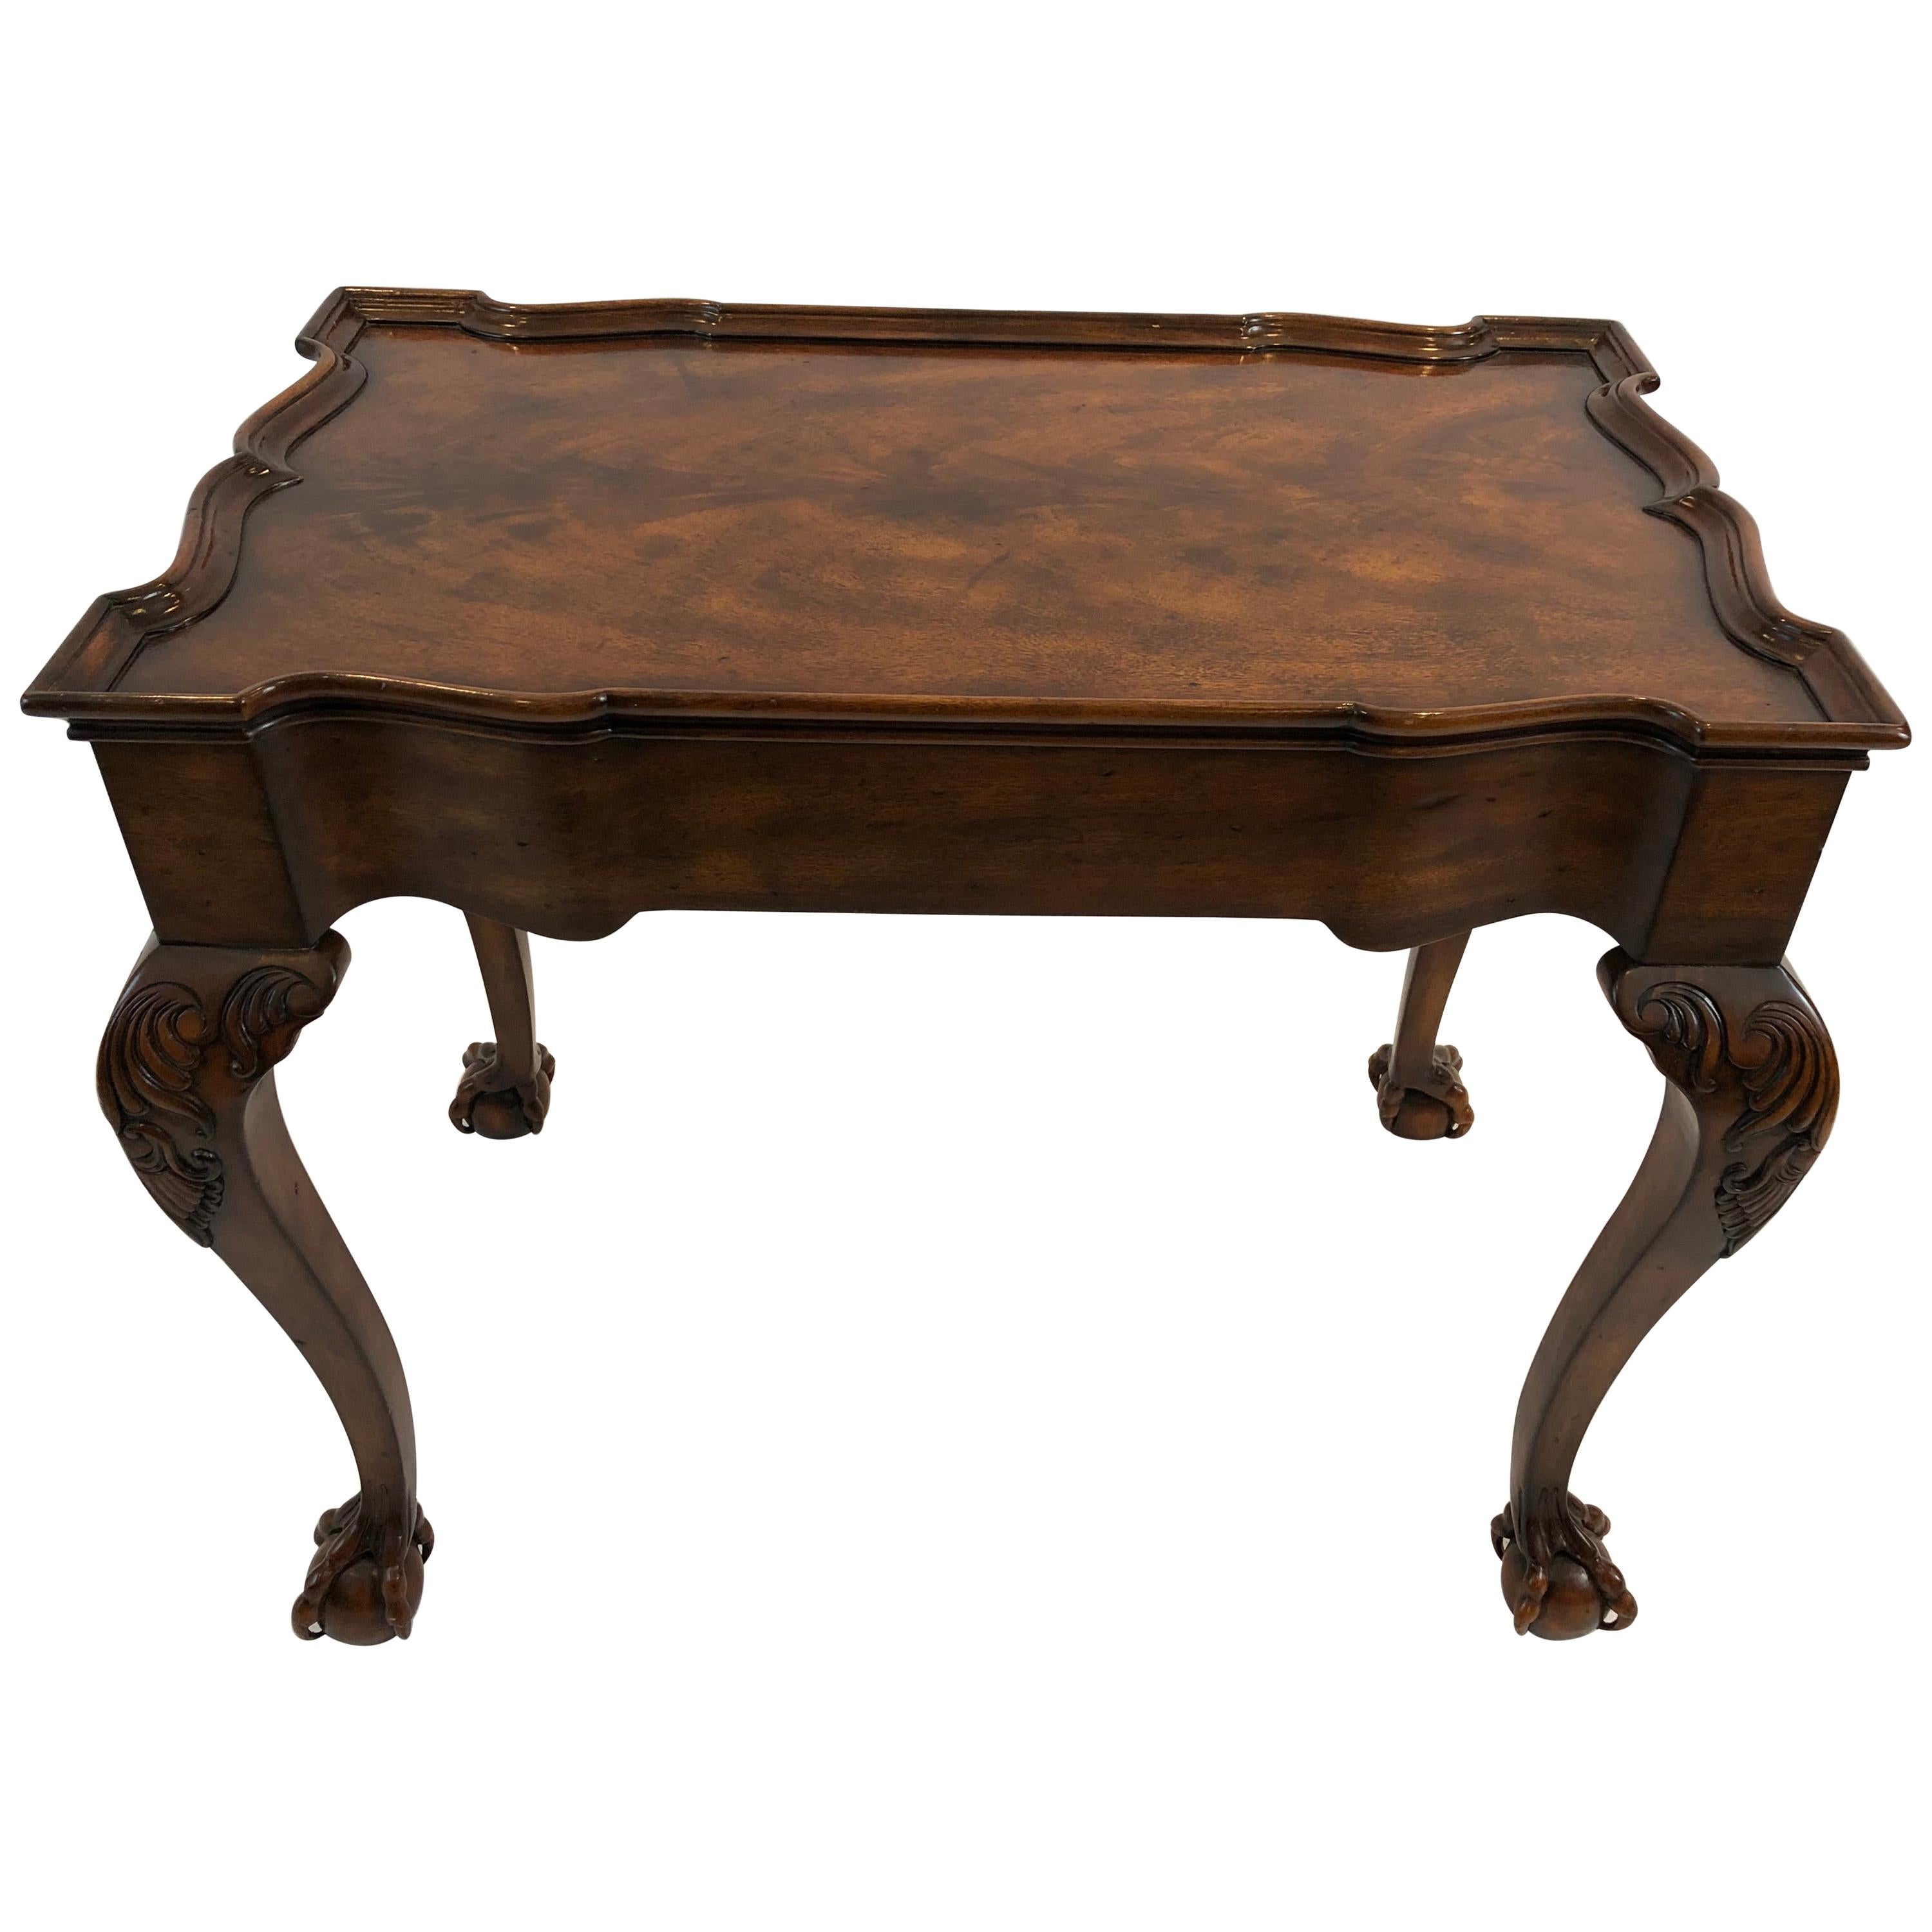 Stunning Flame Mahogany Rectangular Scalloped End or Tea Table with Claw Feet For Sale